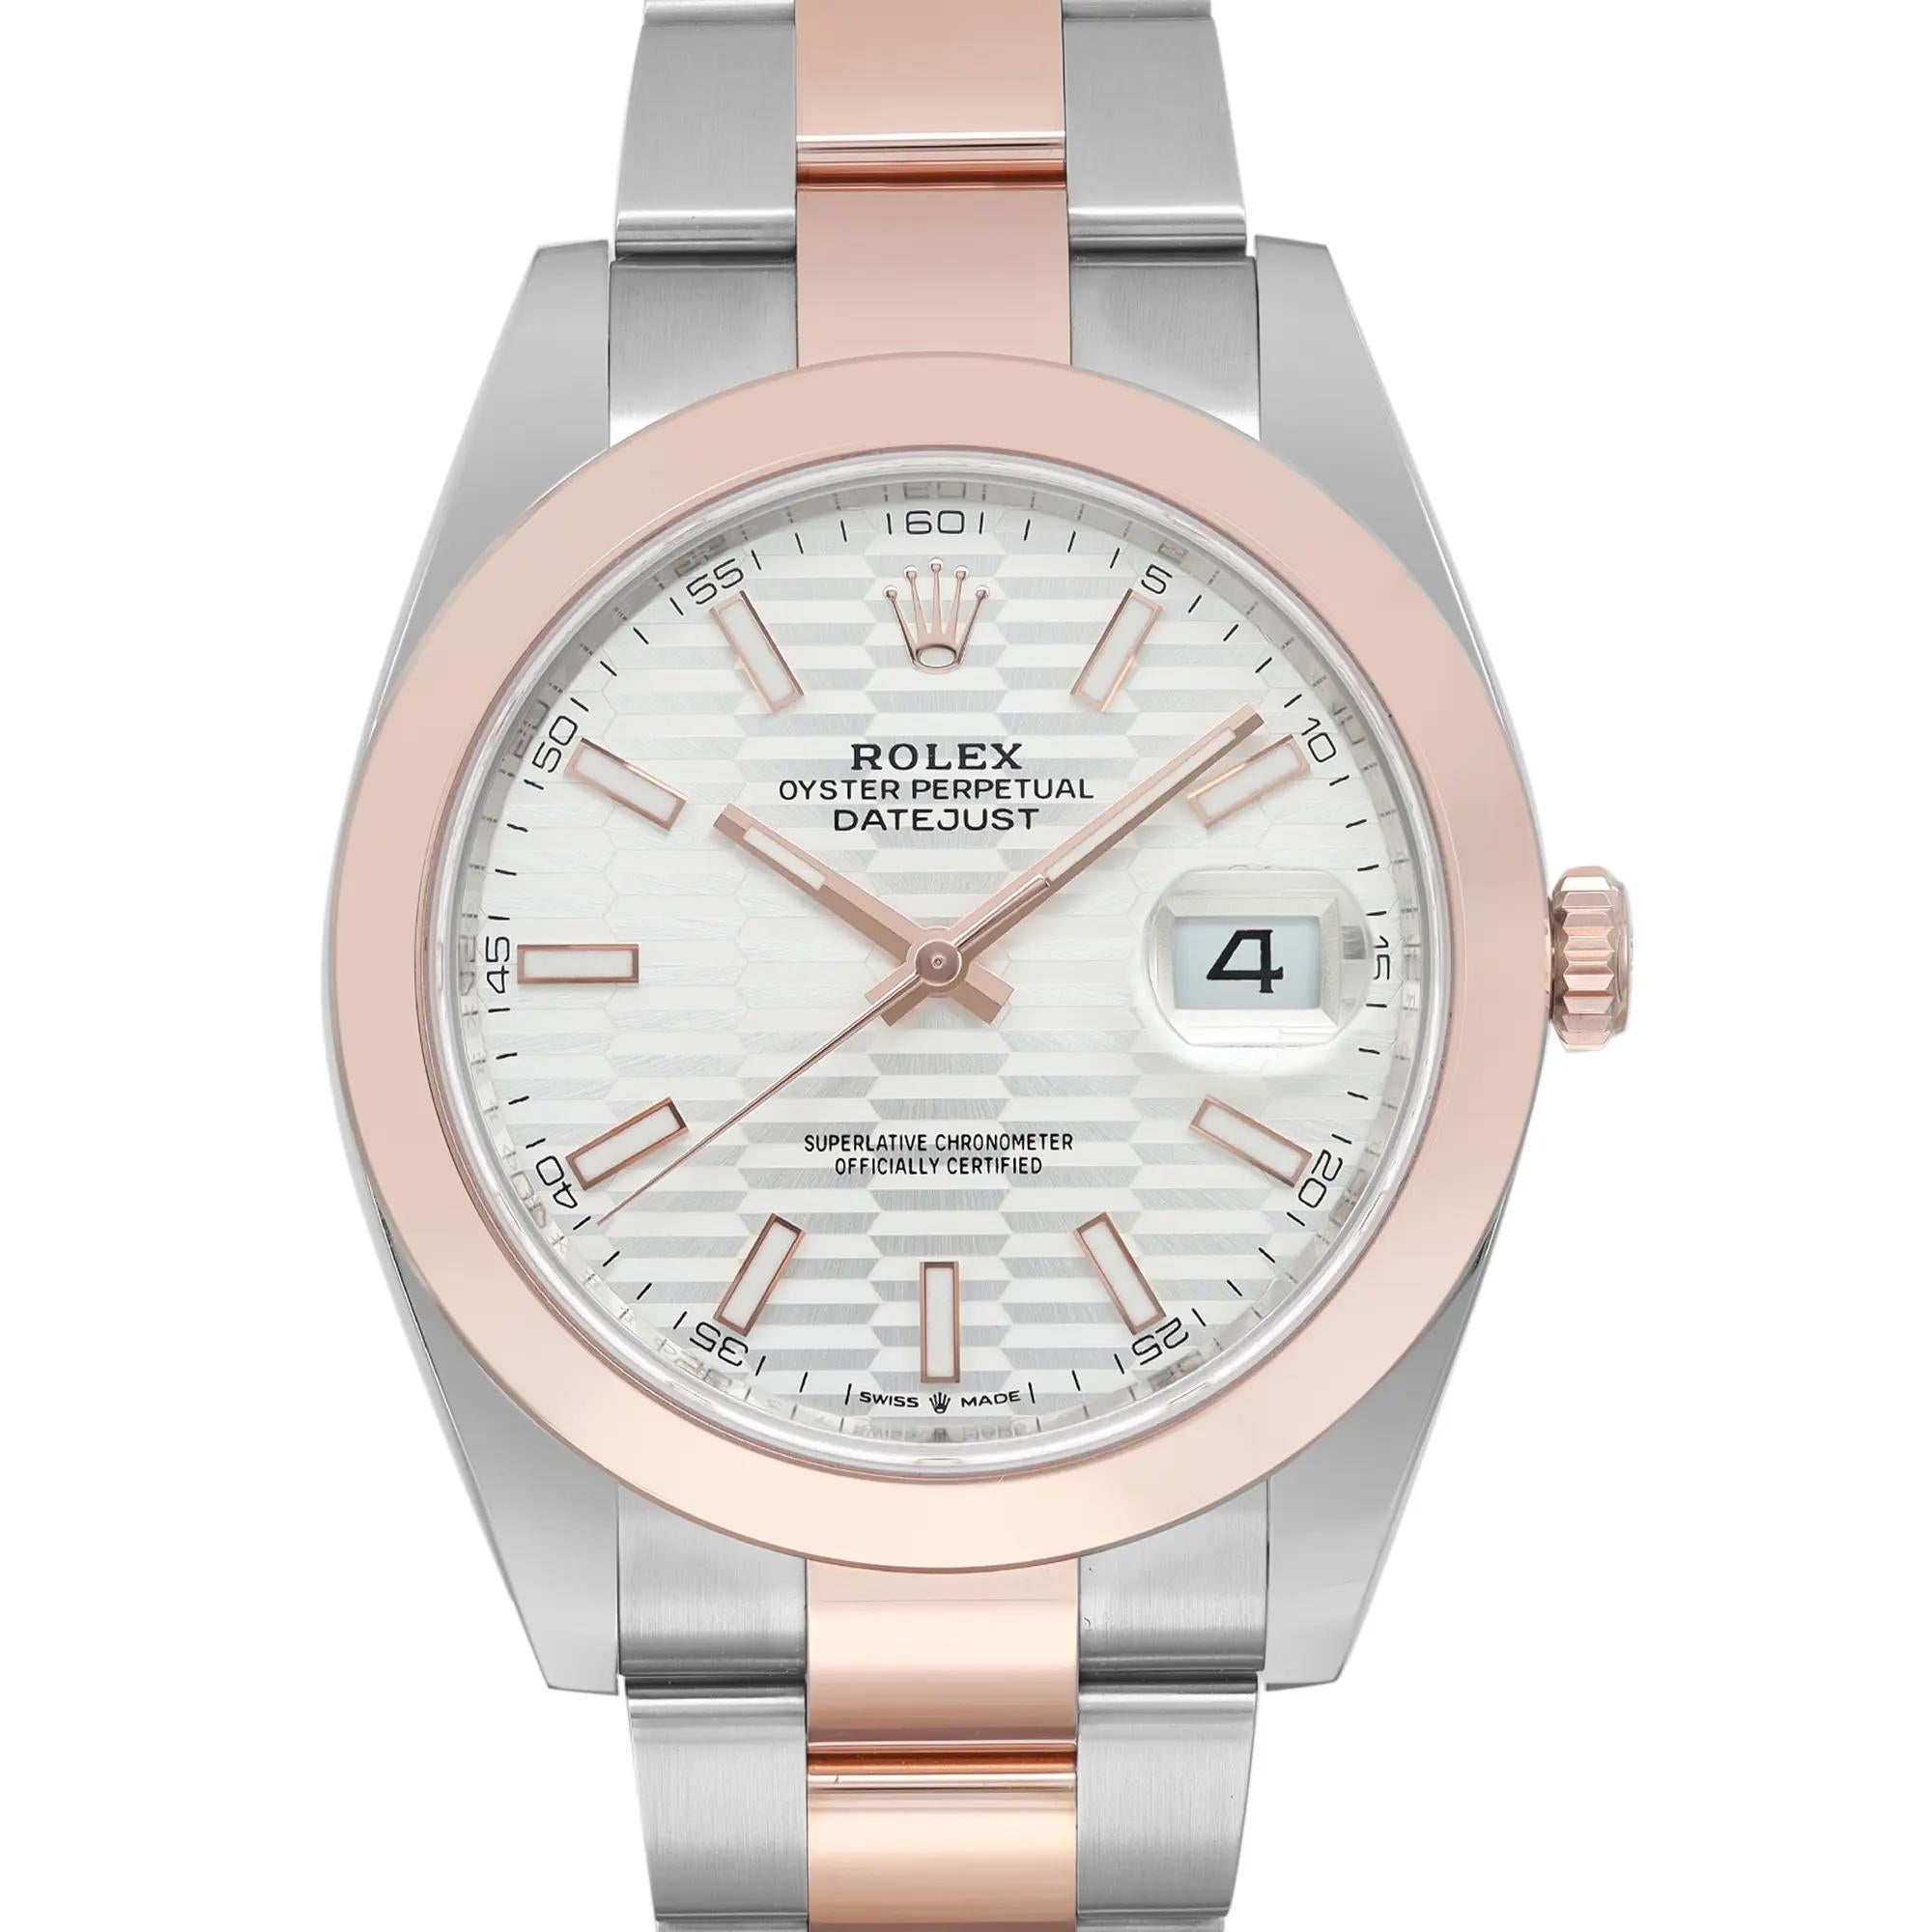 New 2023 card. Comes with a box and papers. 5 year Rolex warranty

General Information:
Brand: Rolex
Model: Datejust 126301
Type: Wristwatch
Department: Men
Year Manufactured: 2023
Country/Region of Manufacture: Switzerland
Style: Dress/Formal,